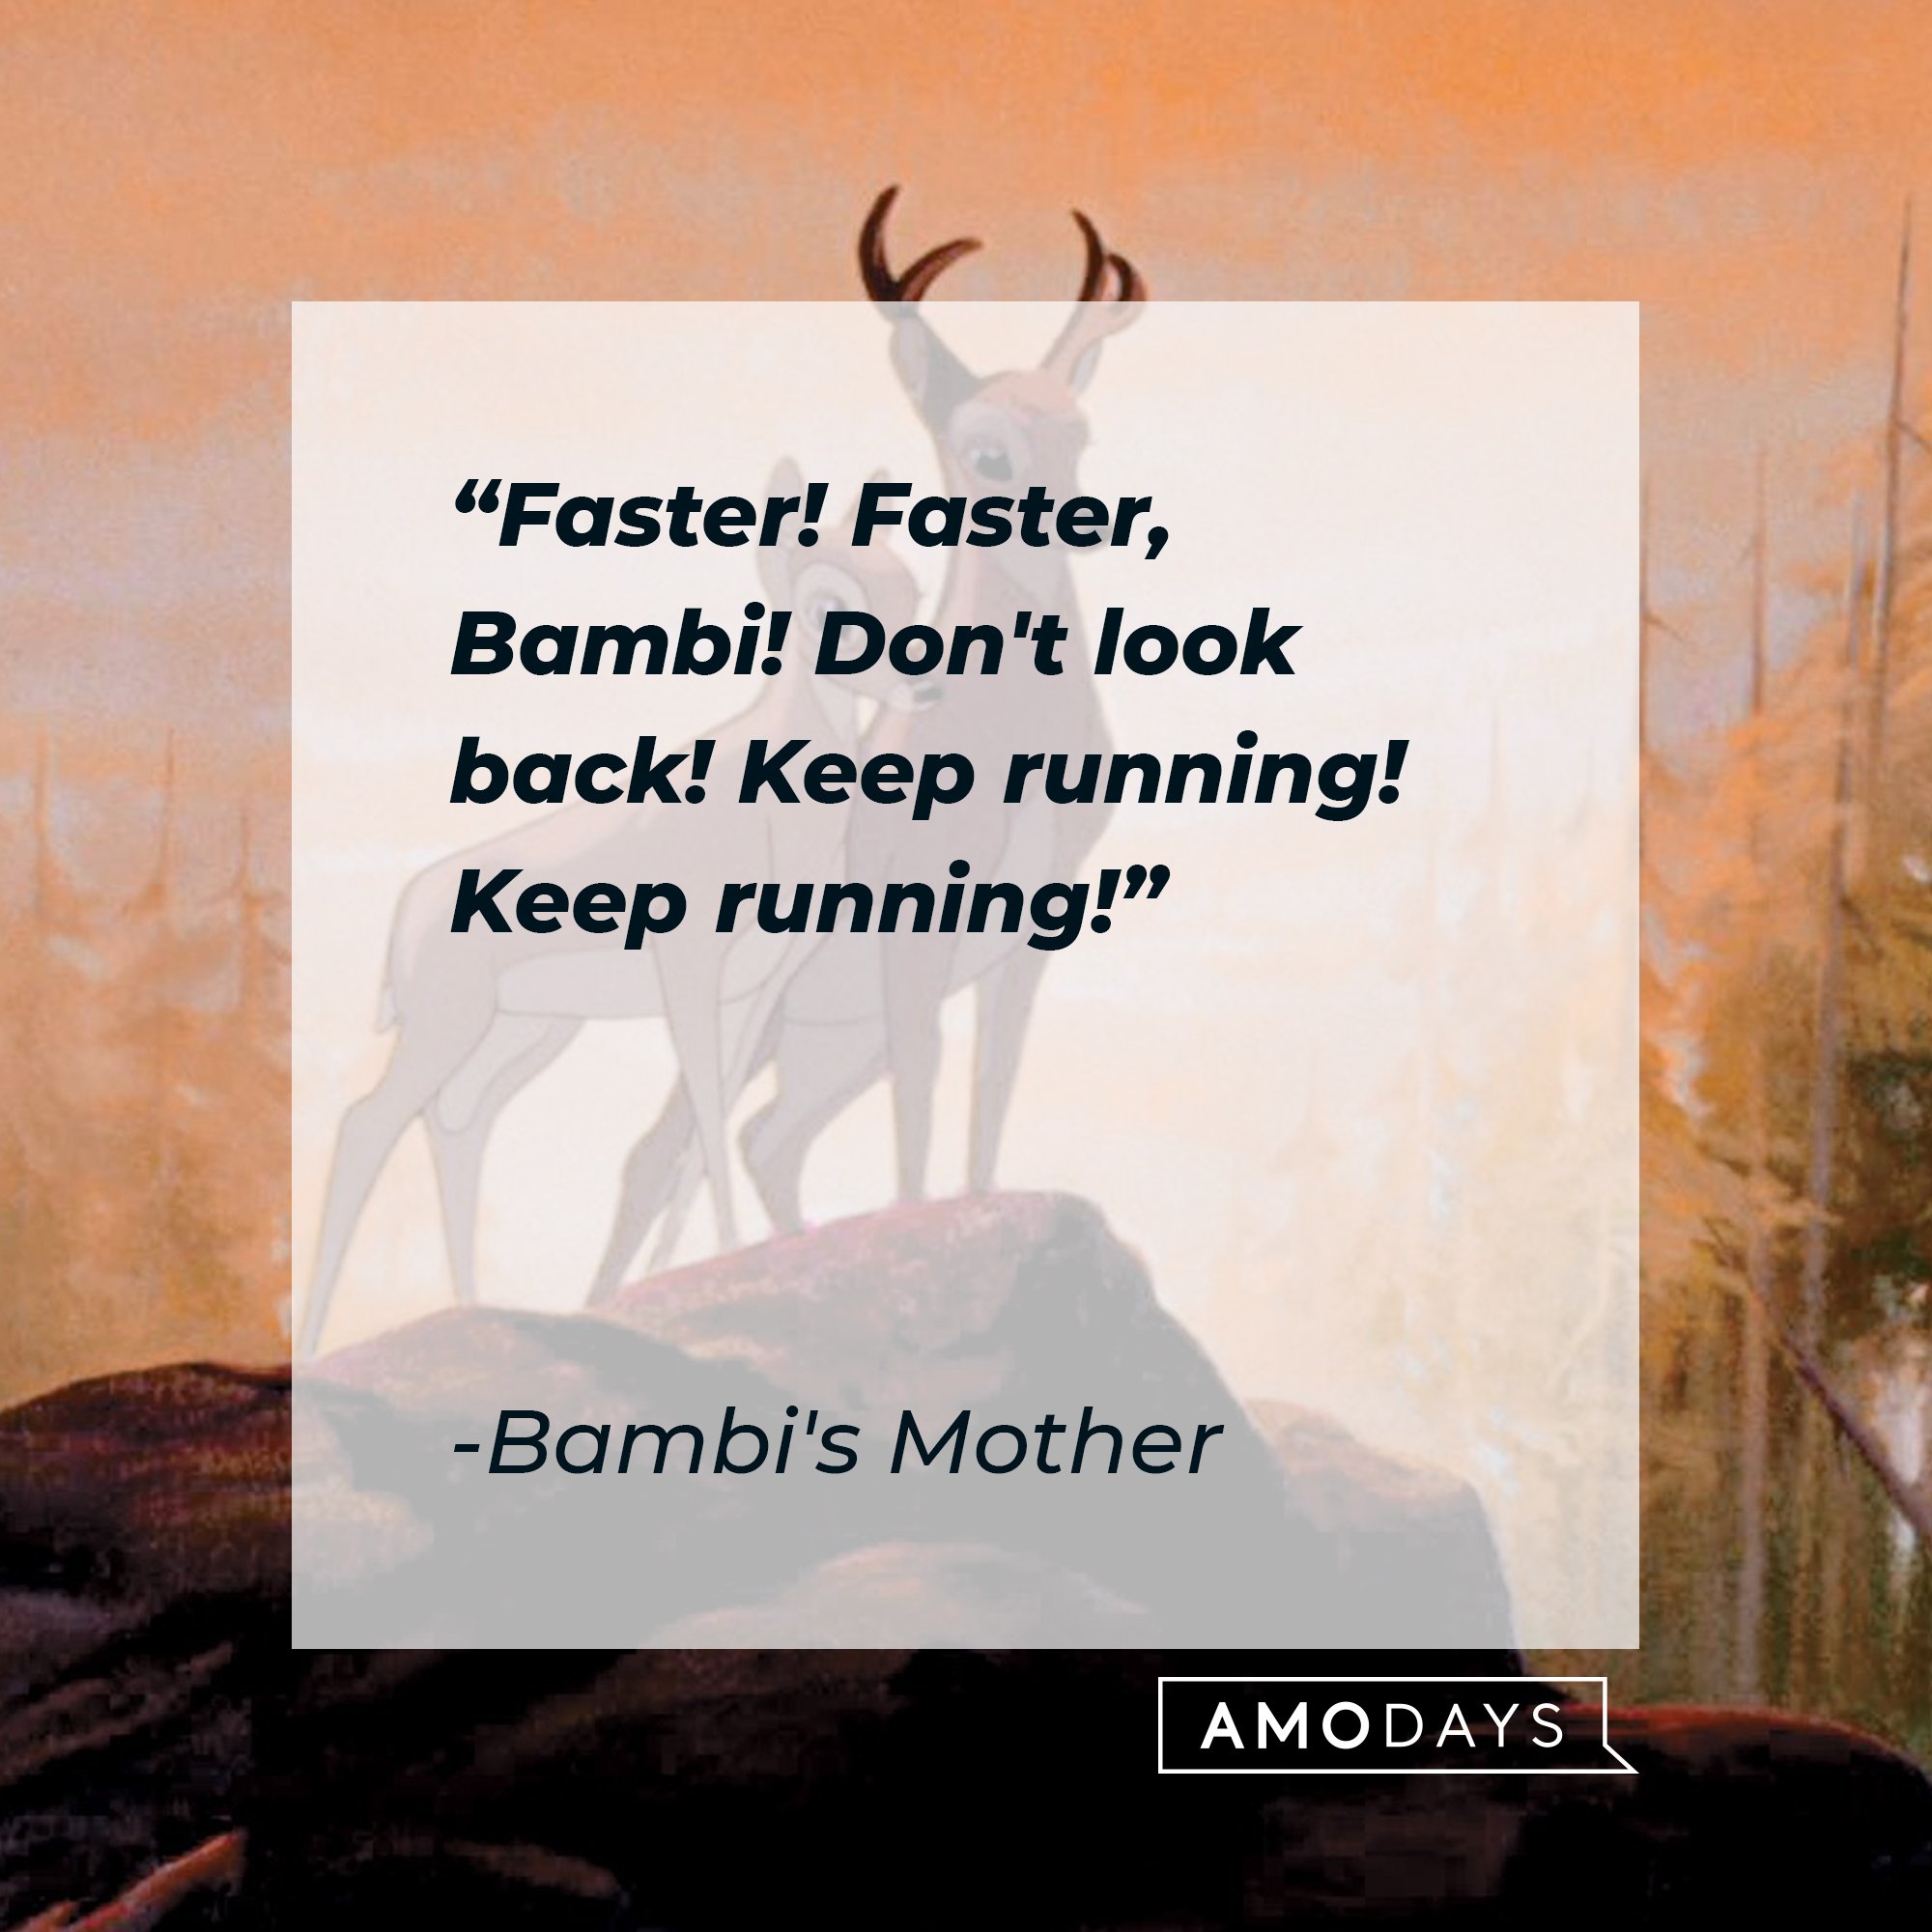 Bambi's Mother's quote "Faster! Faster, Bambi! Don't look back! Keep running! Keep running!" | Source: facebook.com/DisneyBambi